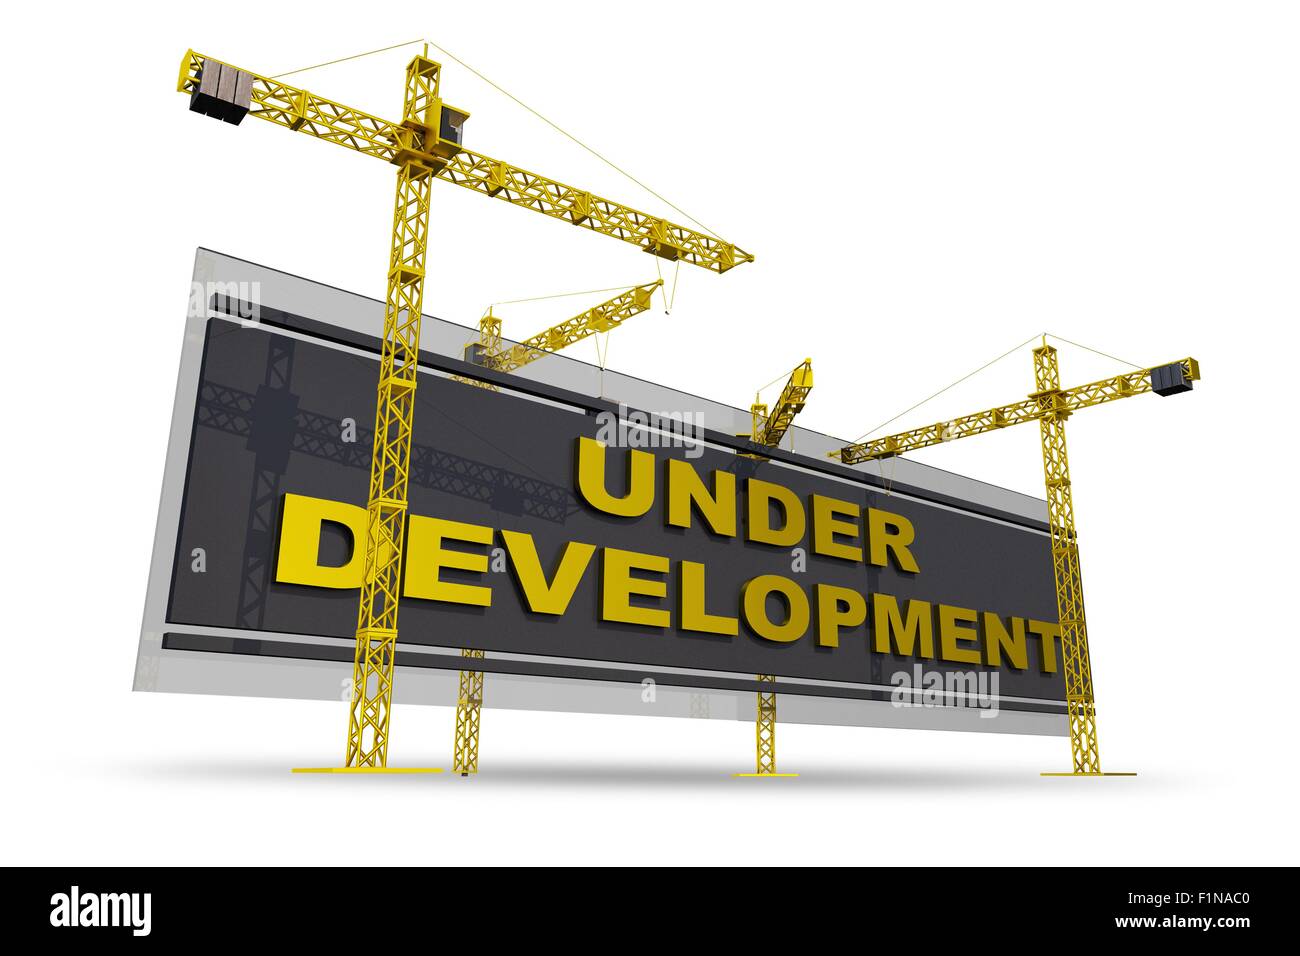 Under Development Concept Illustration. Large Billboard and Construction Cranes Isolated on White. 3D Render Graphic. Stock Photo